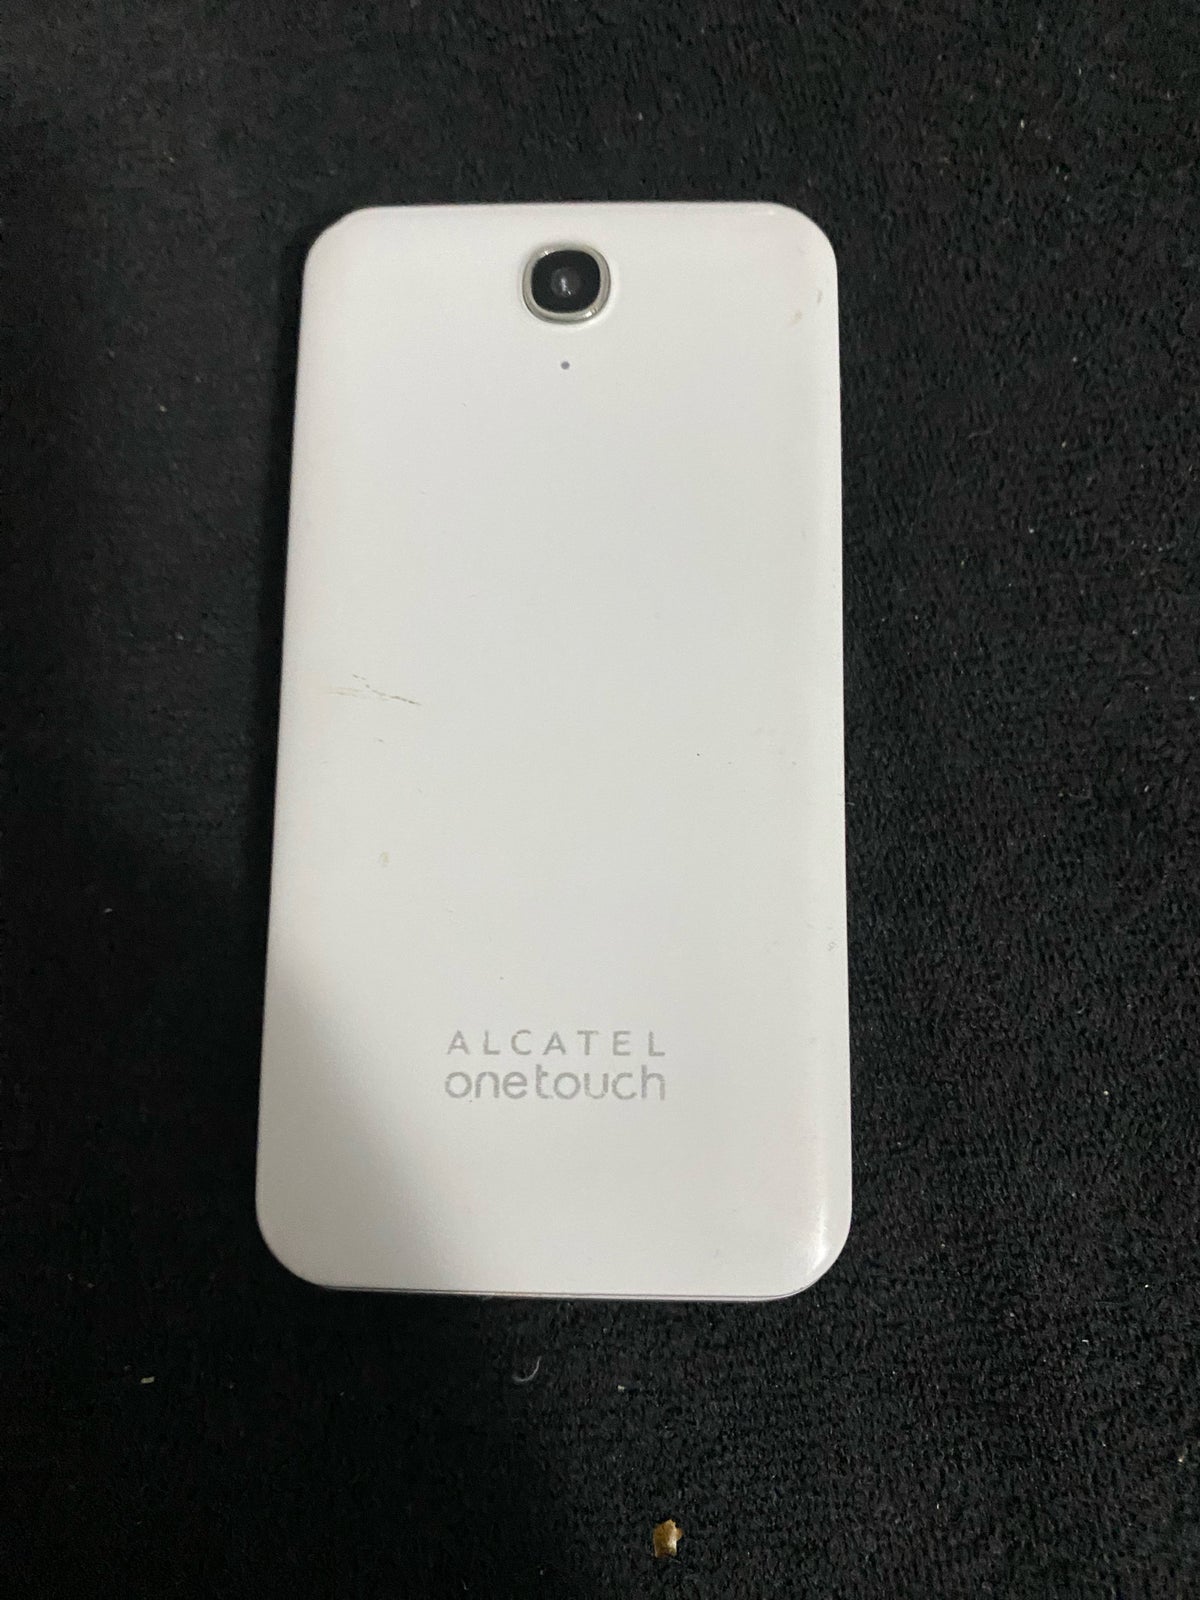 Alcatel One touch, God